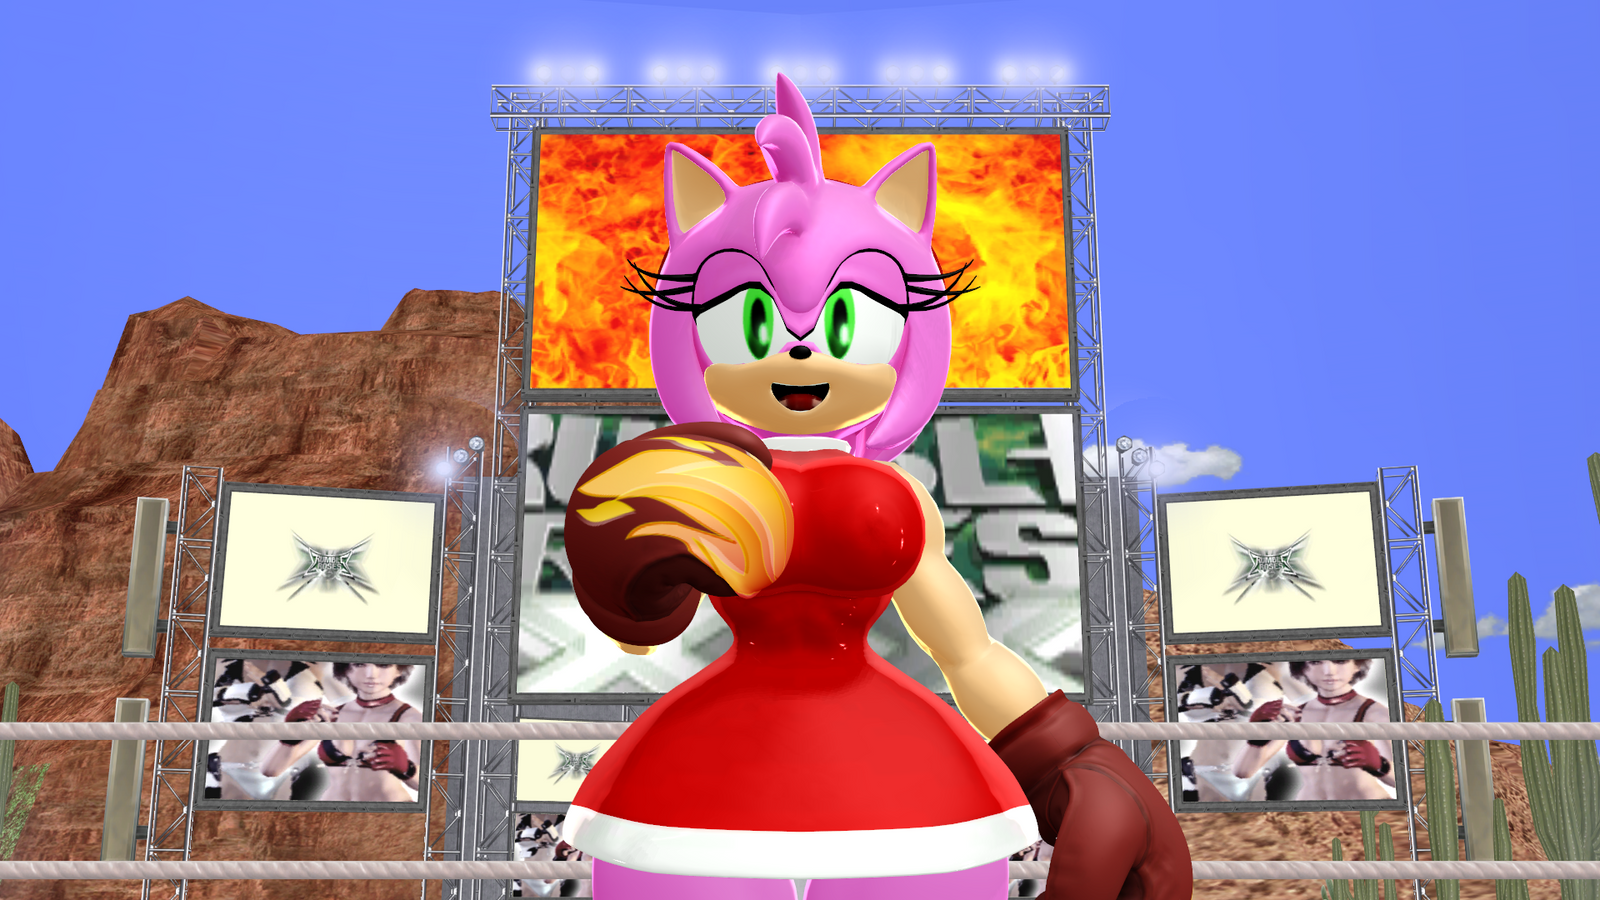 amy rose by luccasonic on Newgrounds